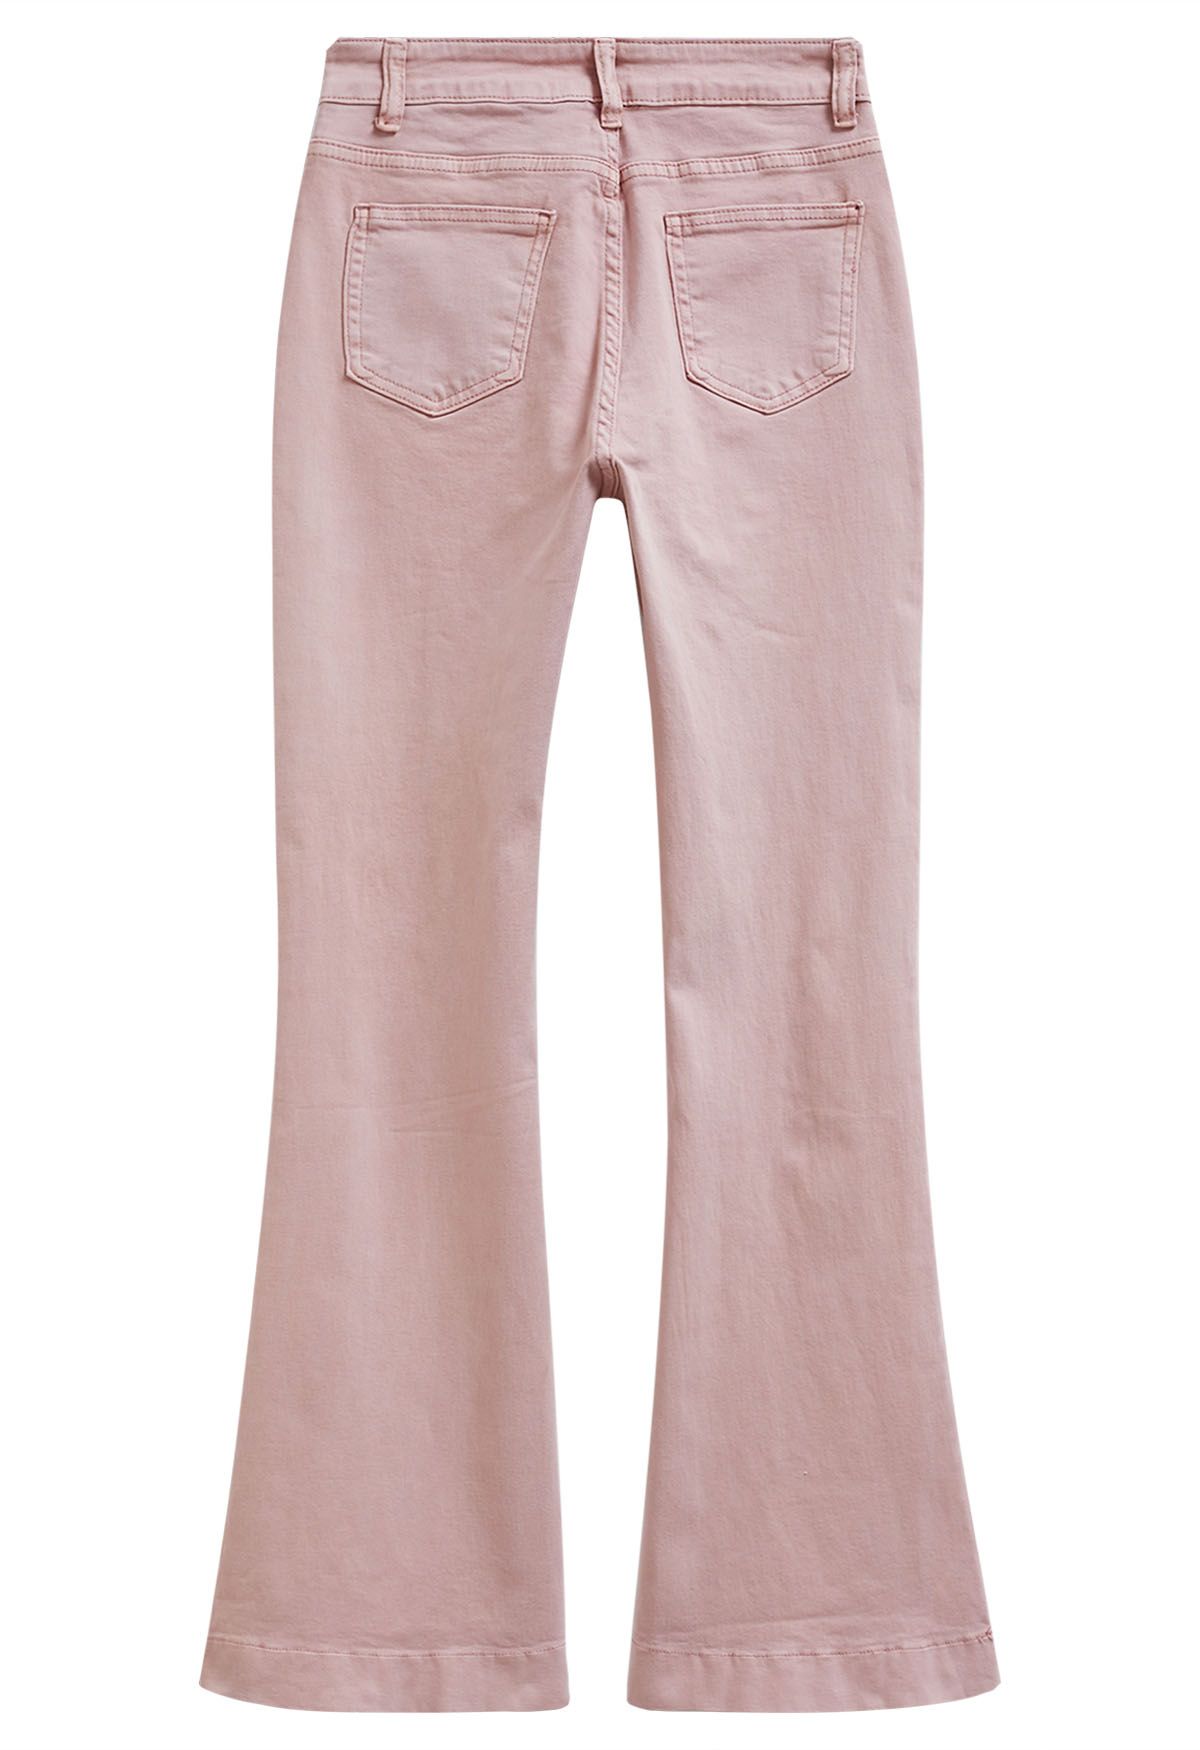 On-Trend High Waist Flare Leg Jeans in Pink